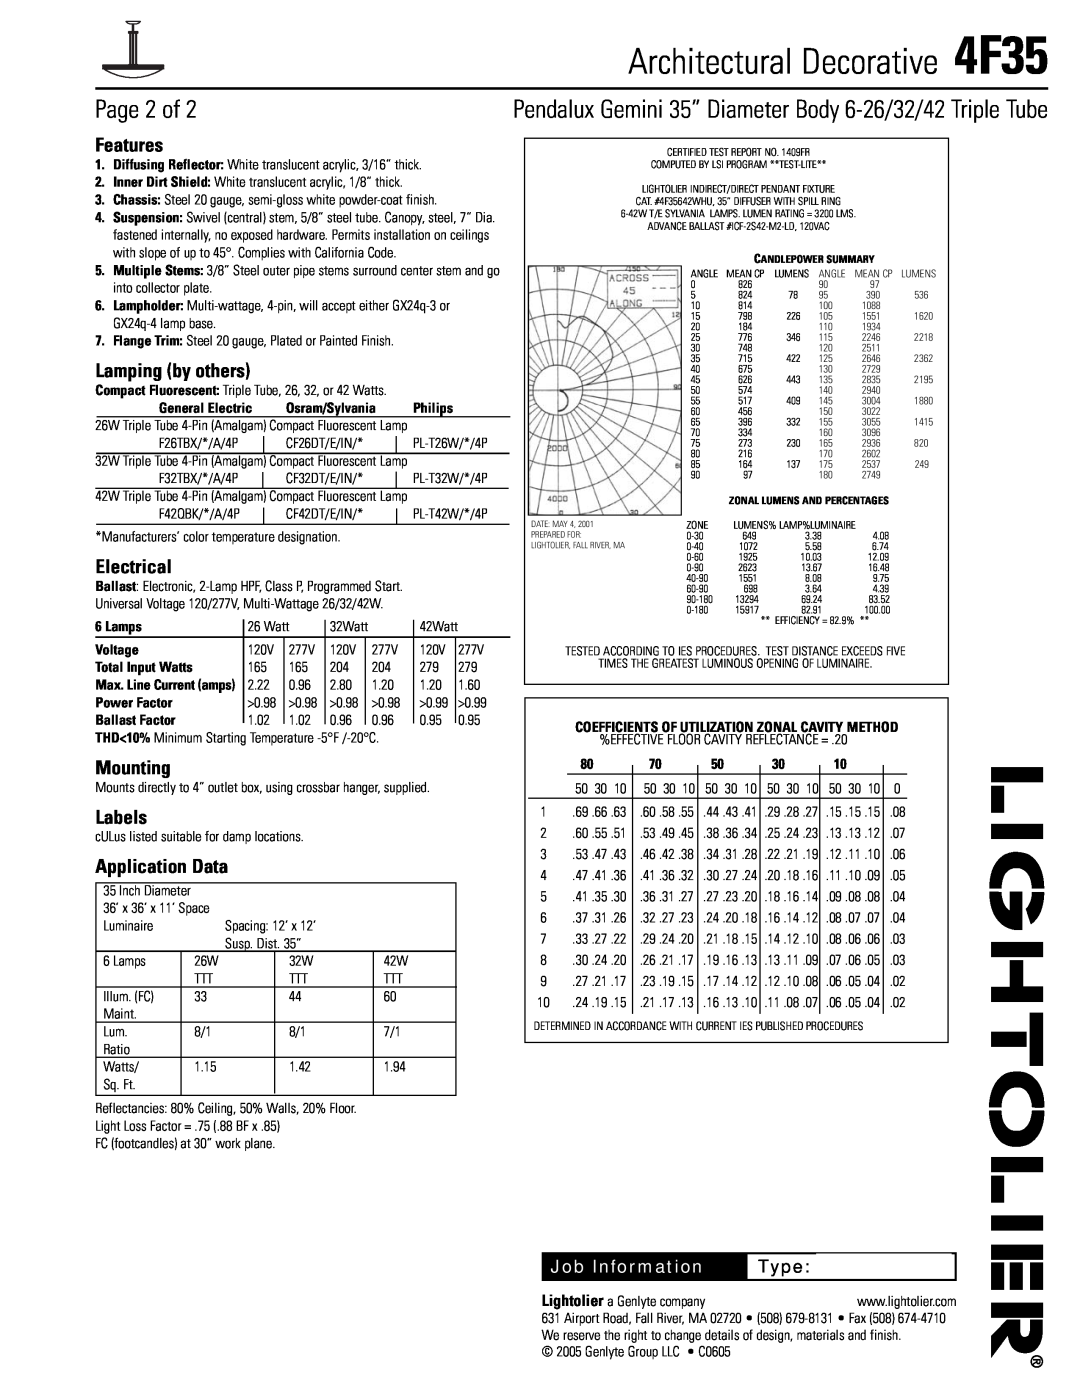 Lightolier 4F35 specifications Page 2 of, Features, Lamping by others, Electrical, Mounting, Labels, Application Data, Type 